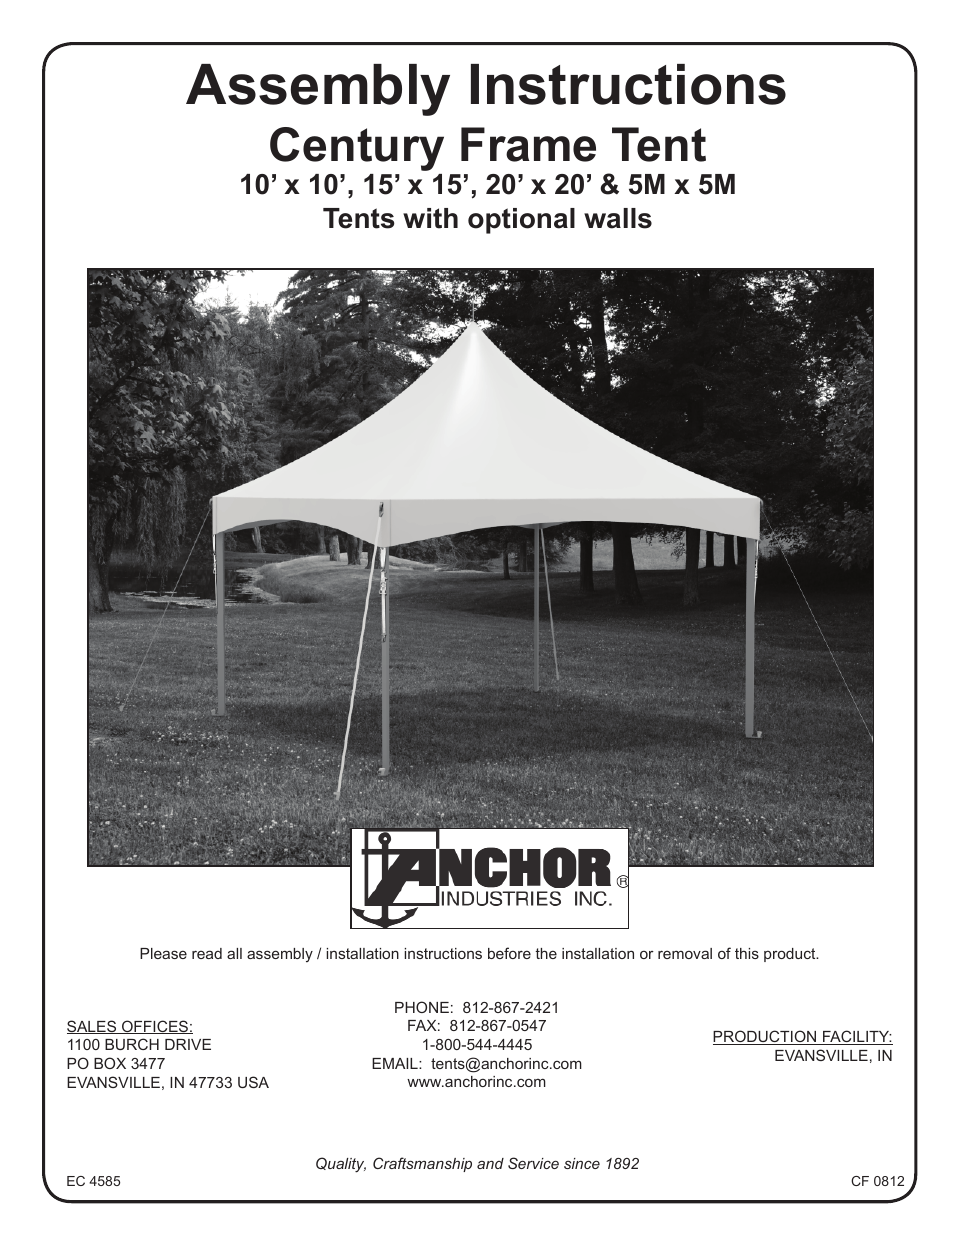 CENTURY FRAME TENTS 10X10, 15X15, 5M AND 20X20